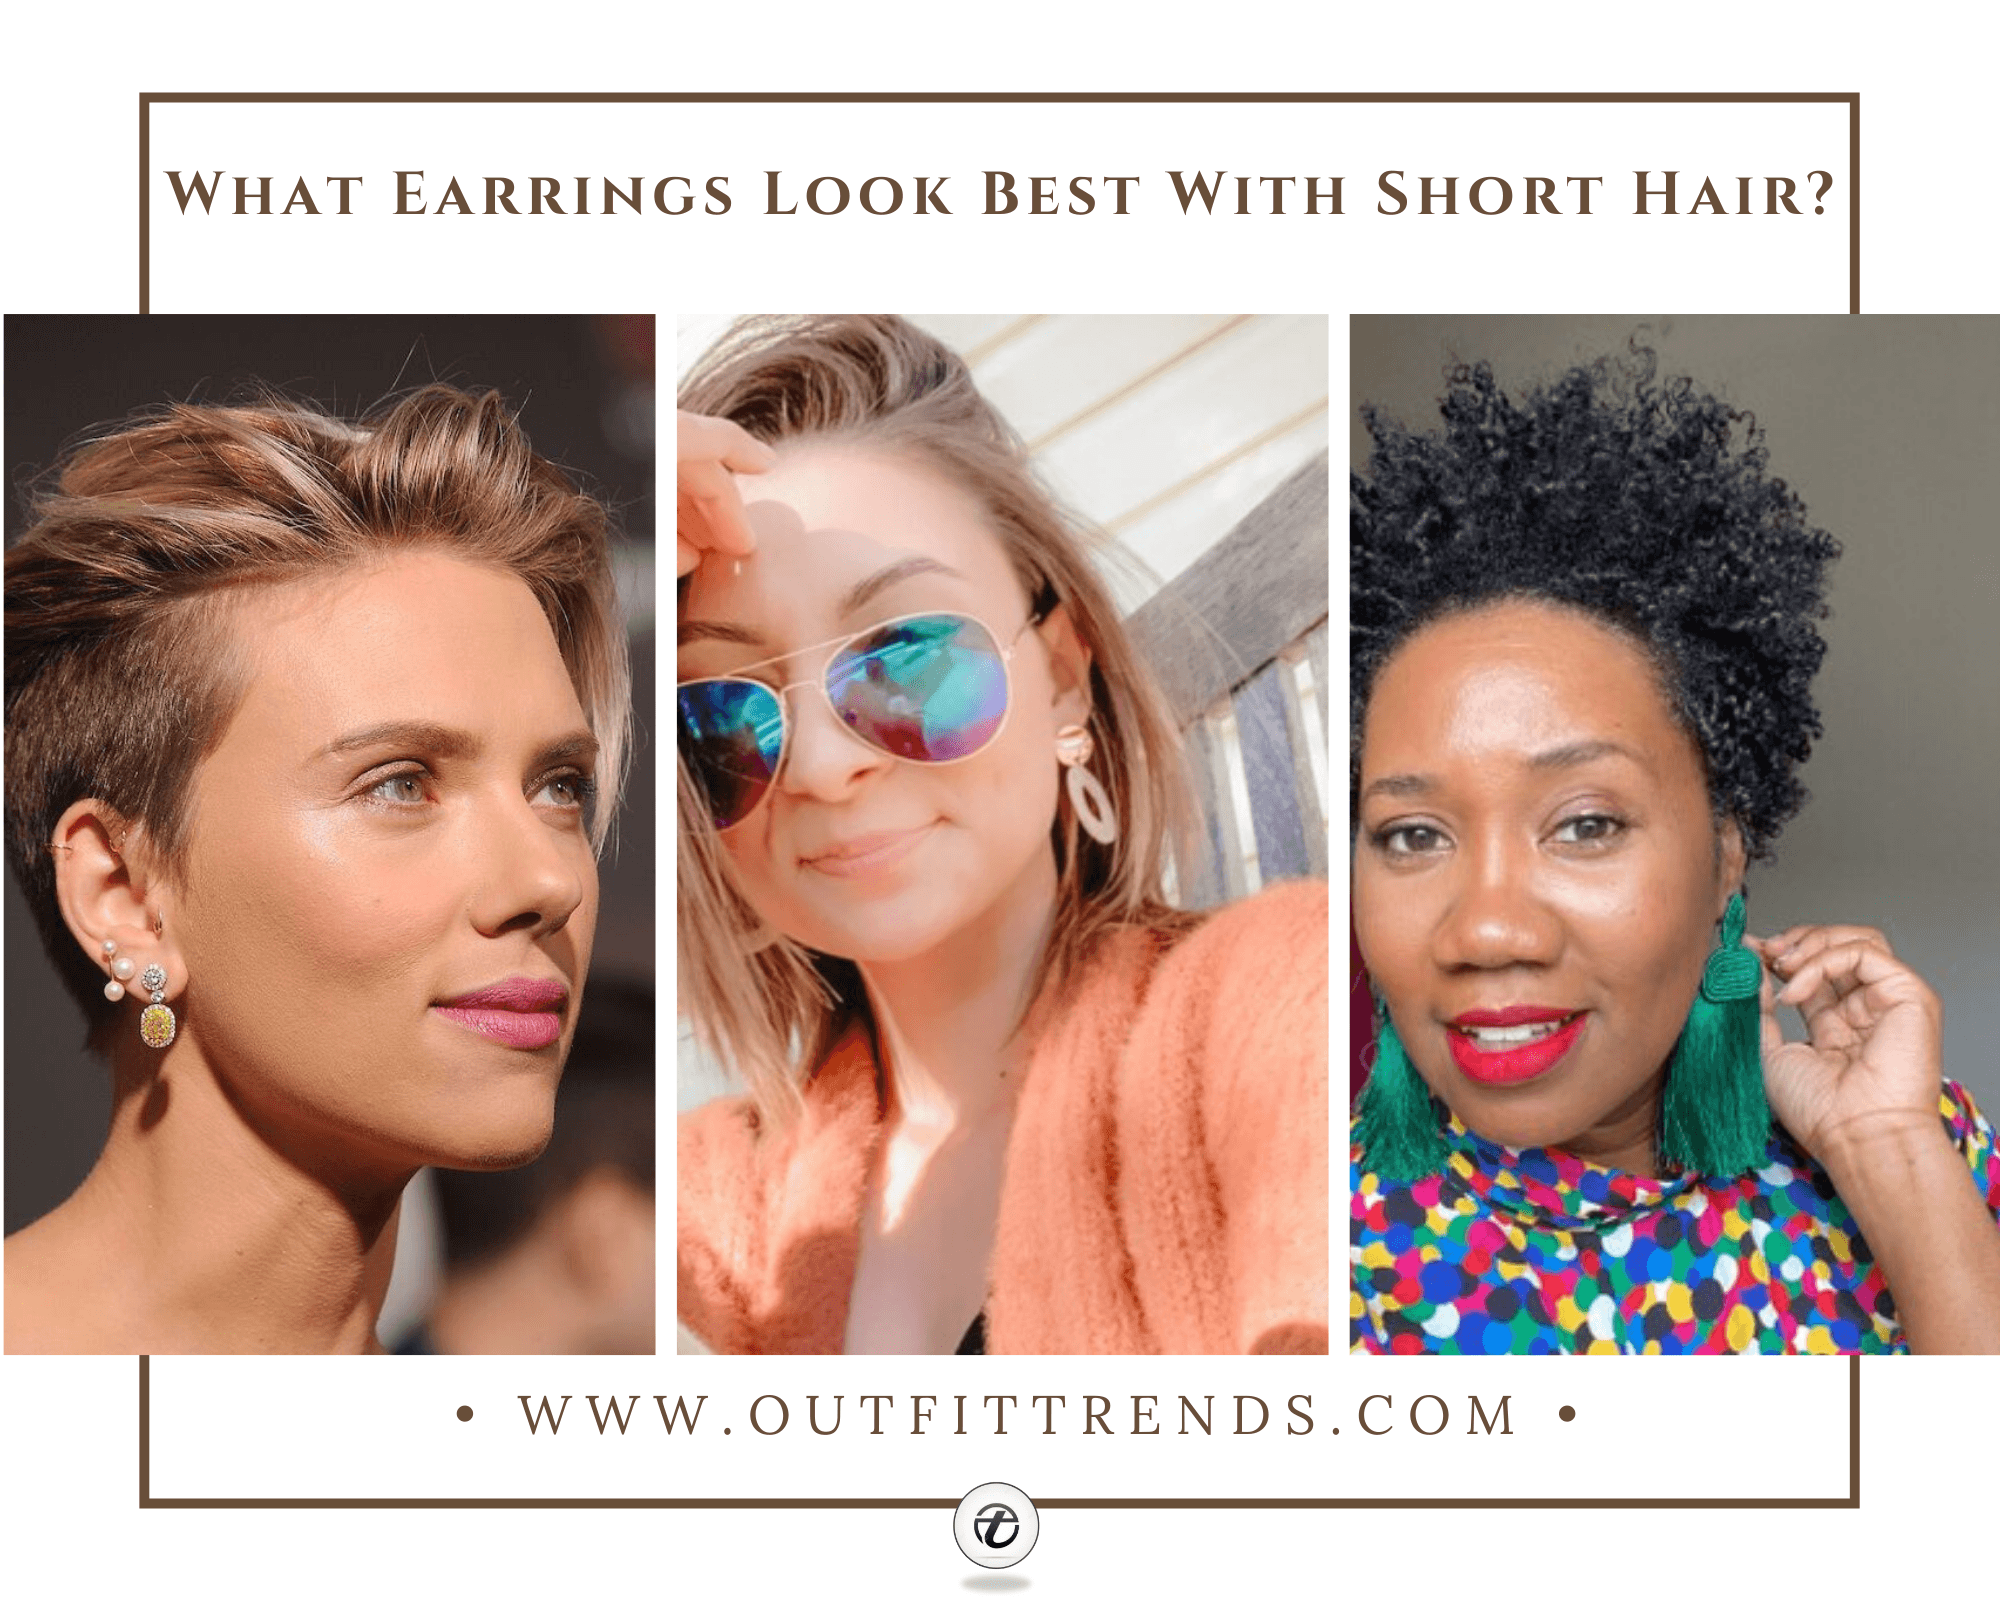 27 Stunning Ideas To Wear Earrings With Short Hair in 2021